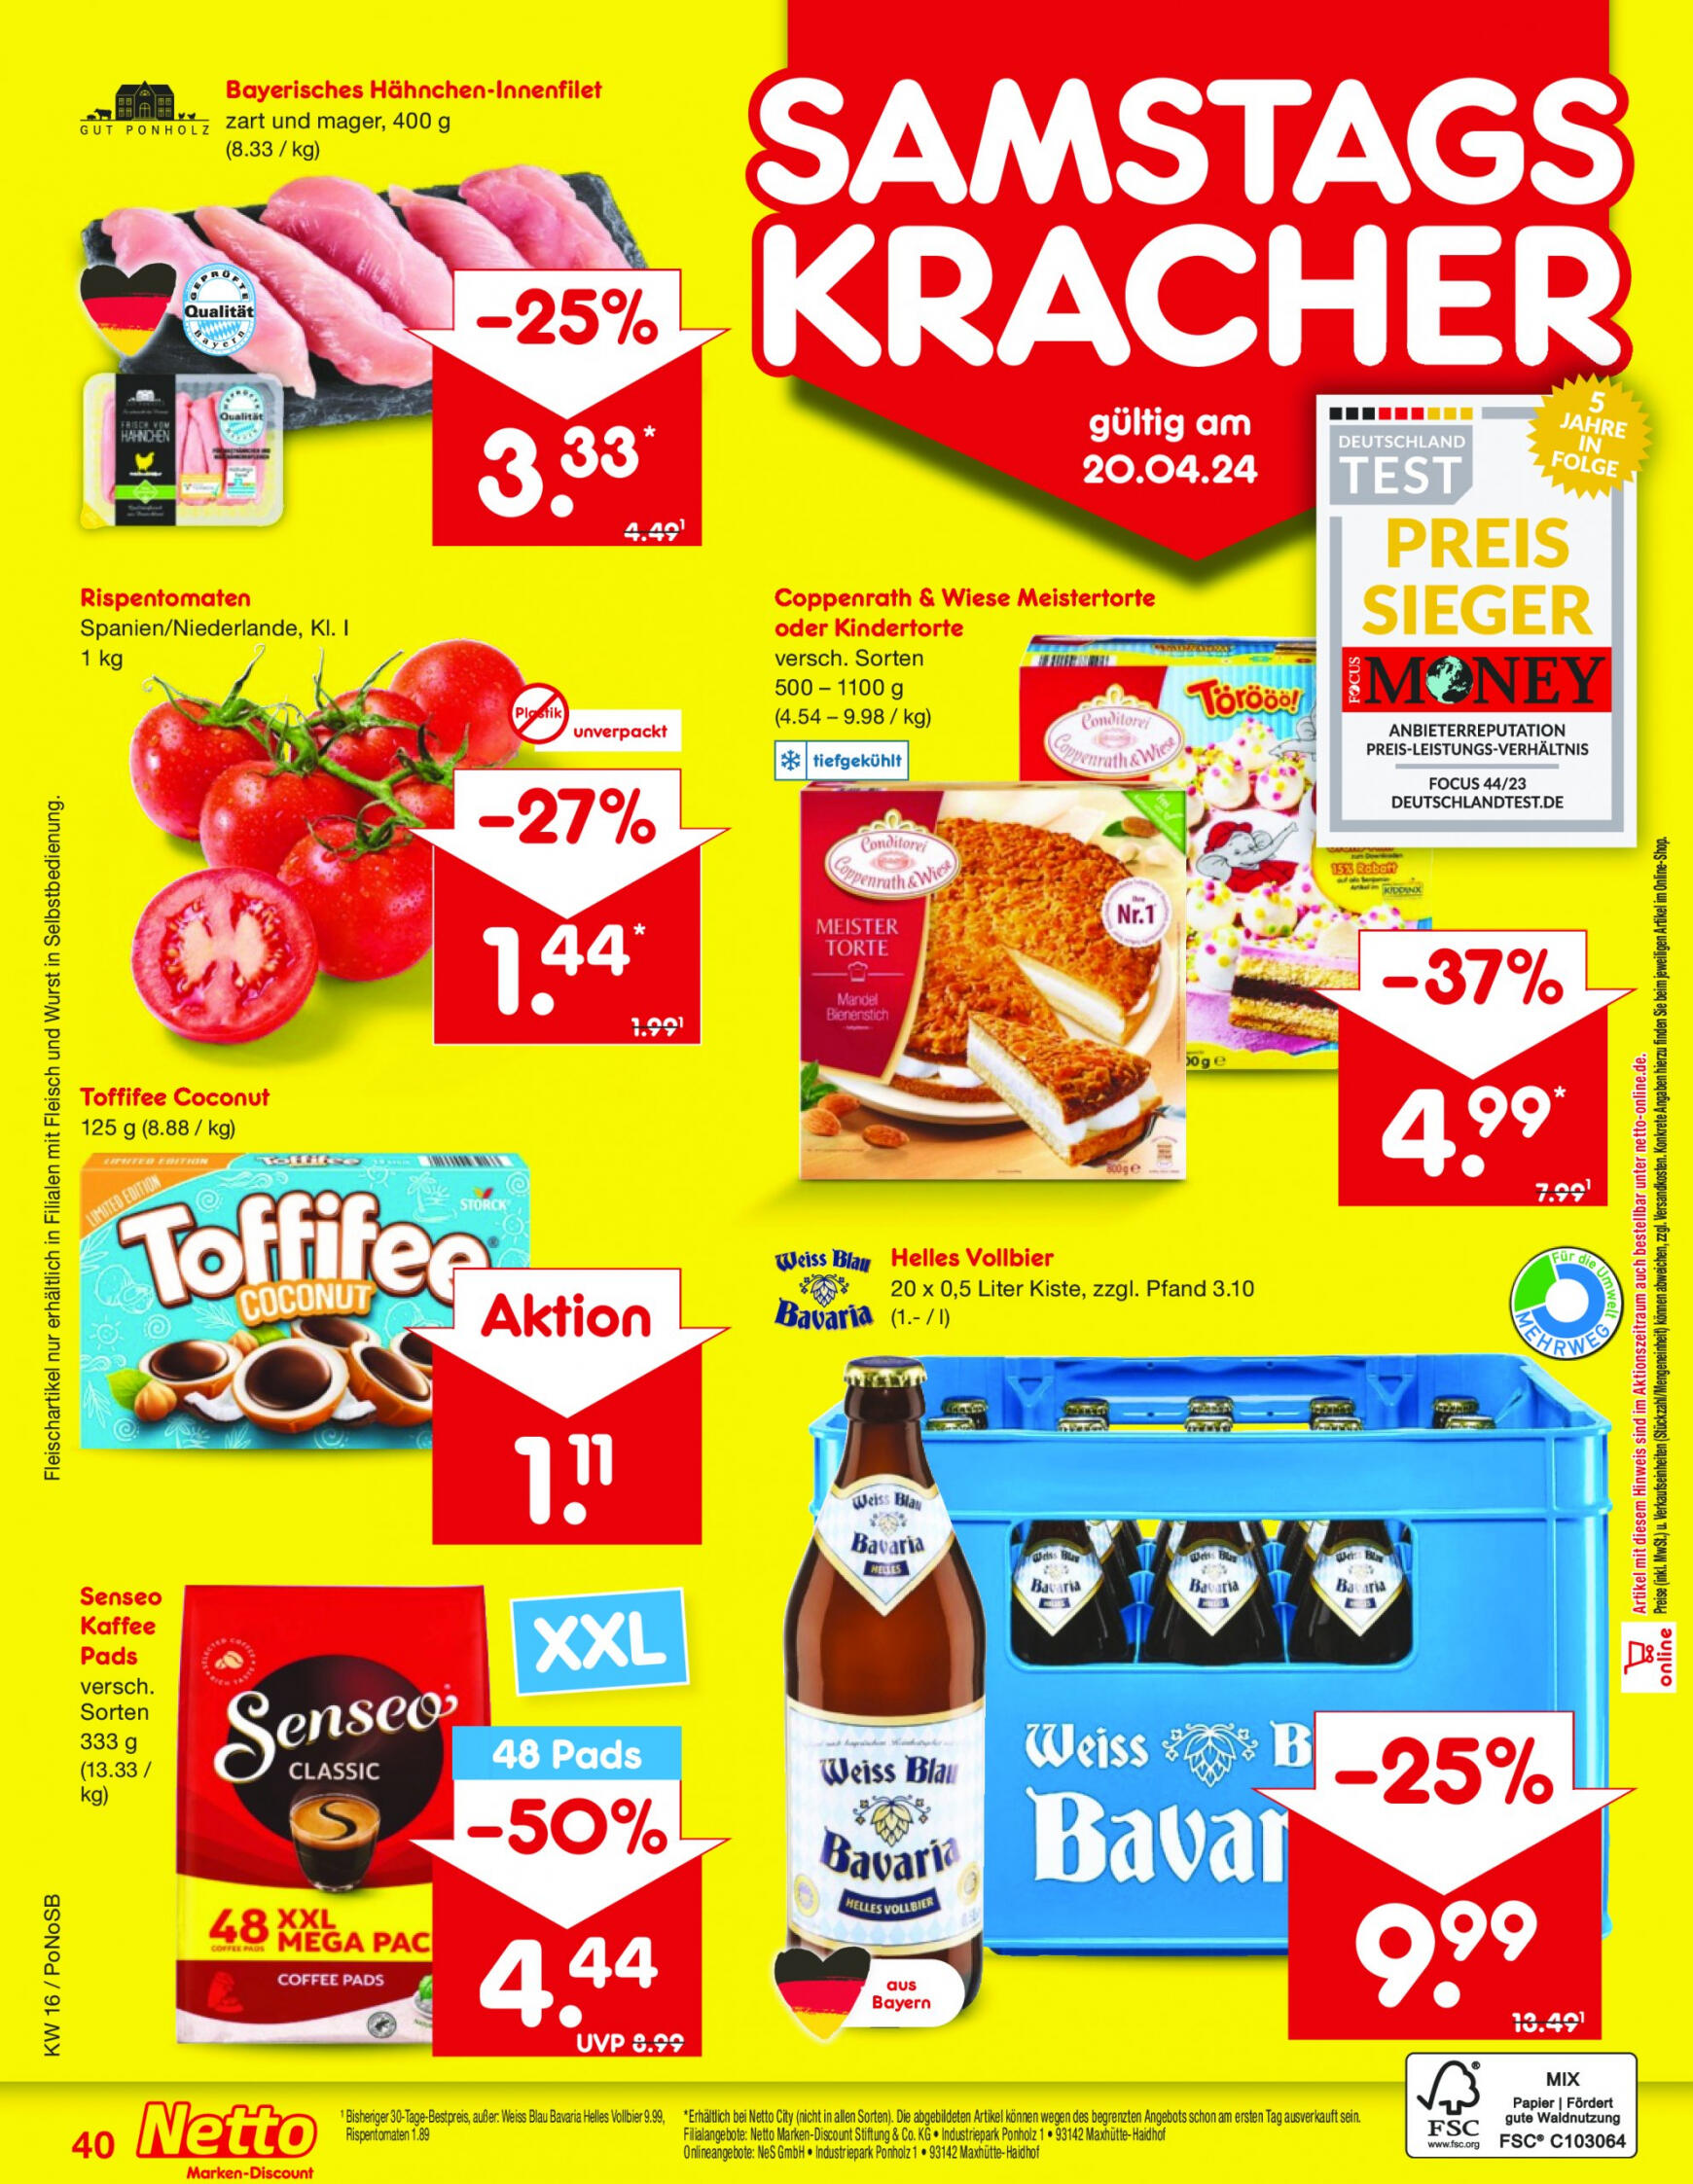 netto - Flyer Netto aktuell 15.04. - 20.04. - page: 46